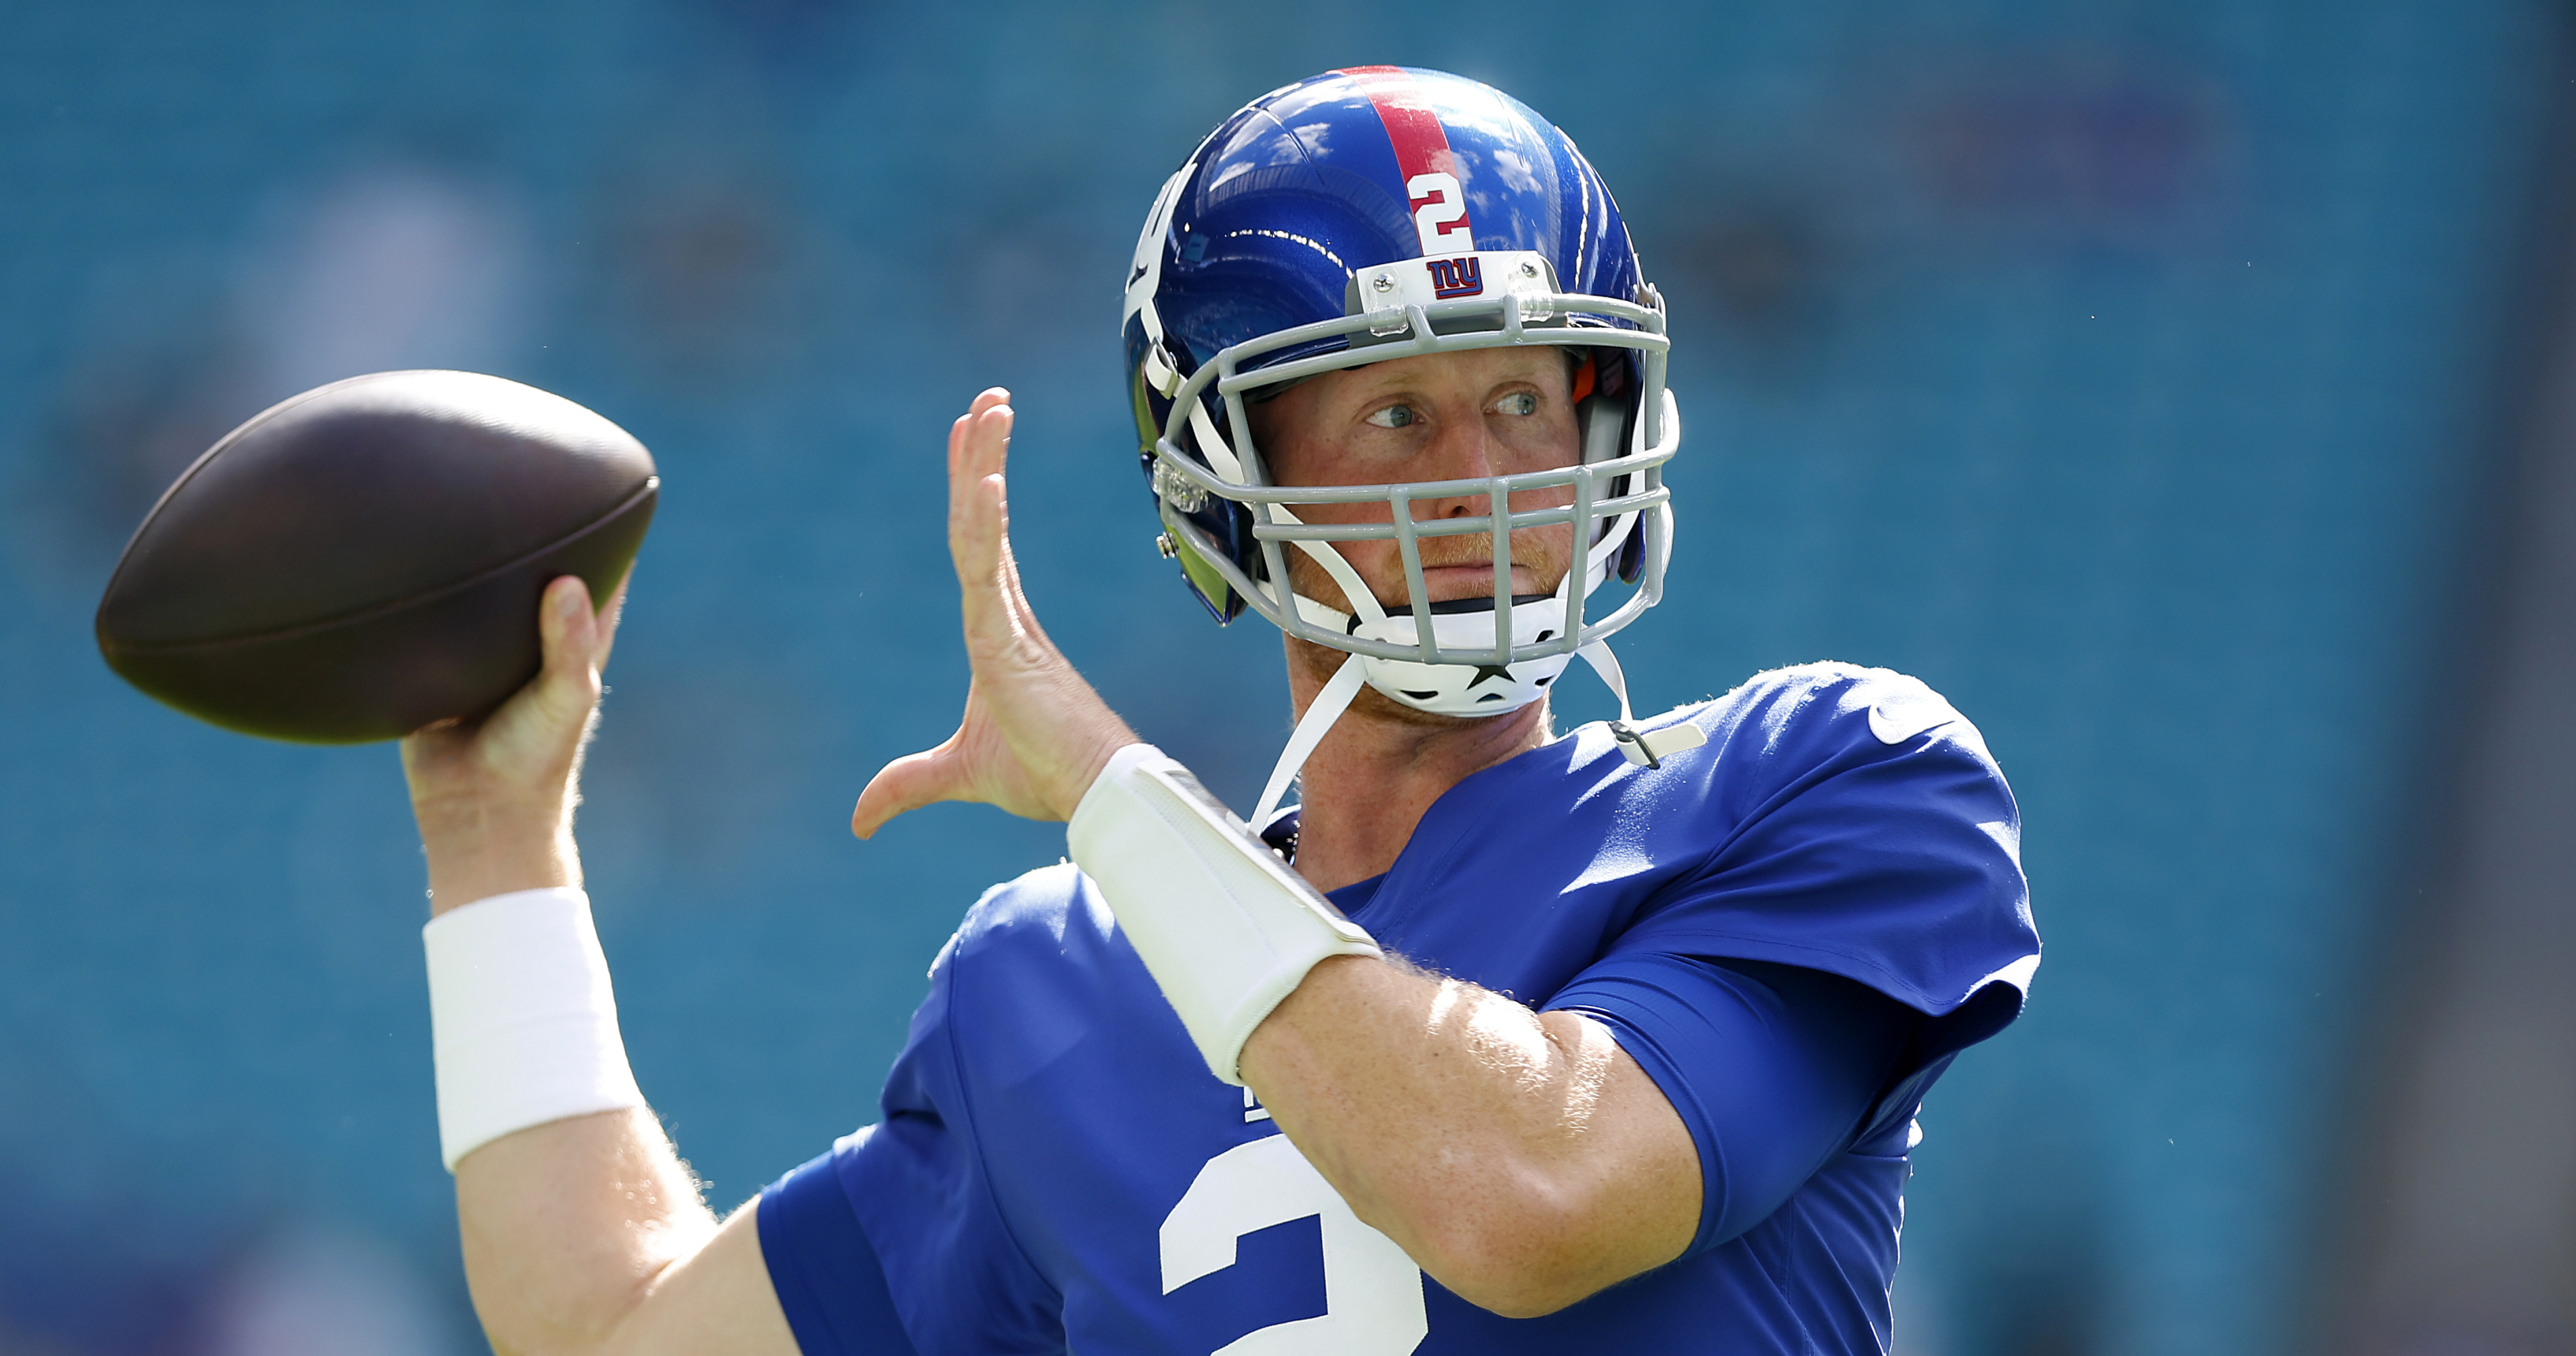 Giants' Mike Glennon Suffered Concussion in Week 13 Loss to